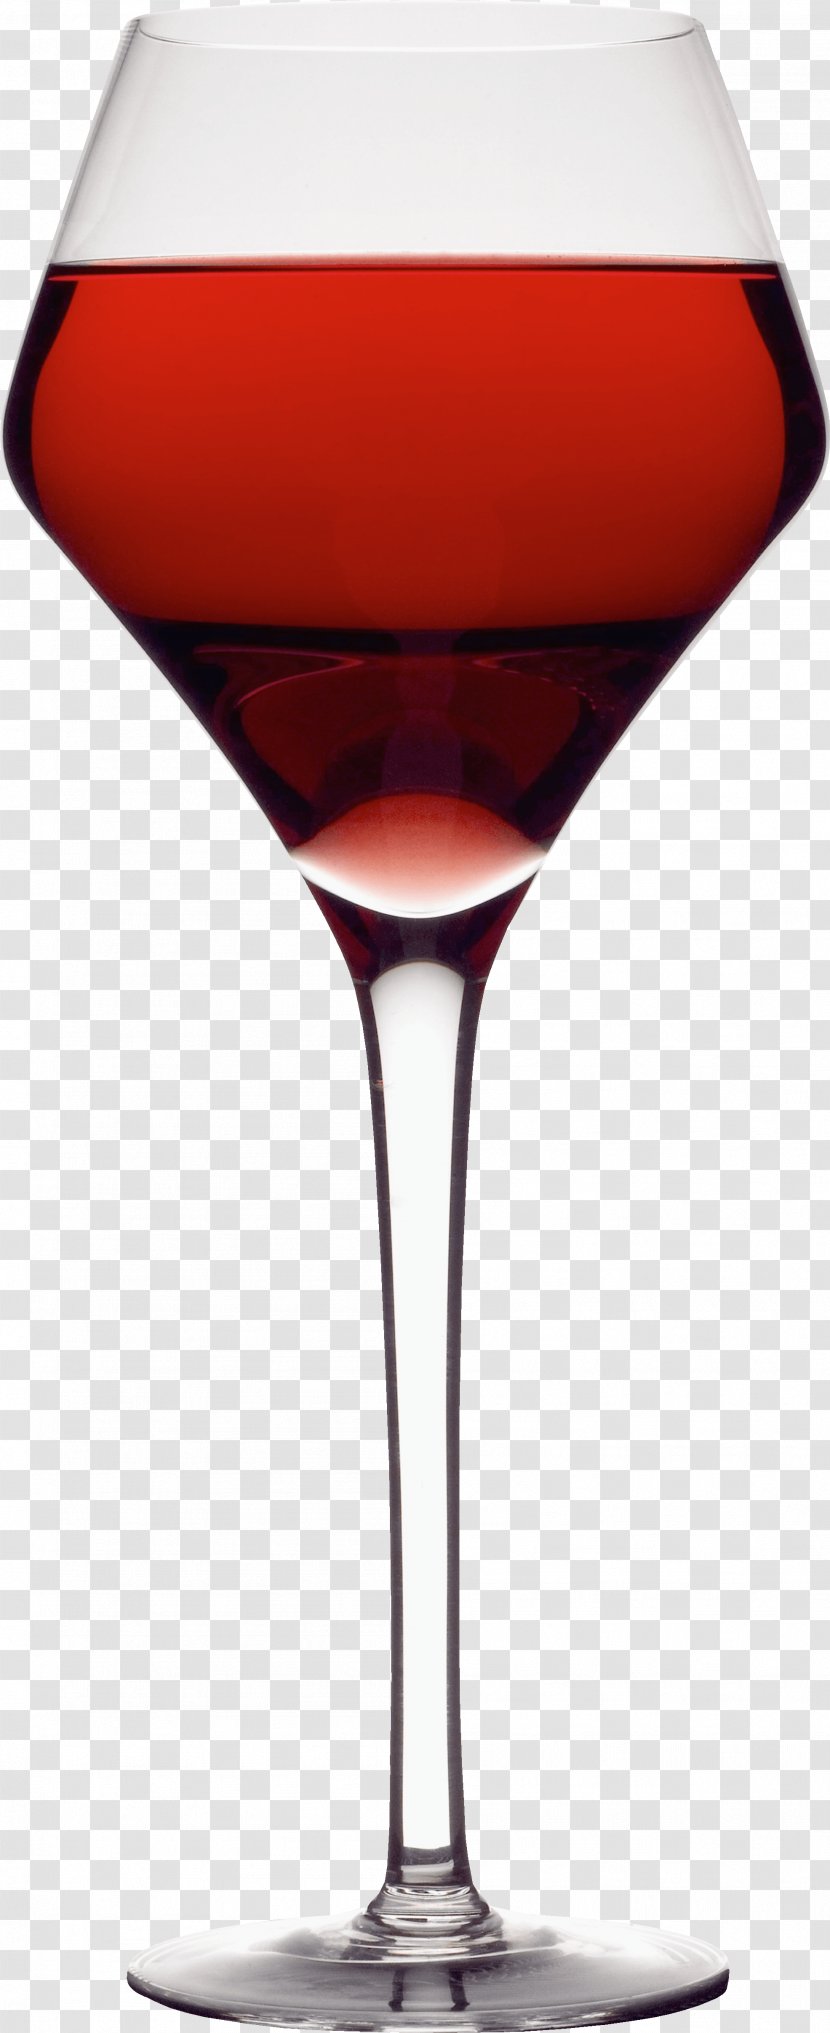 Red Wine Cocktail Martini Glass - Tableware - Image Transparent PNG